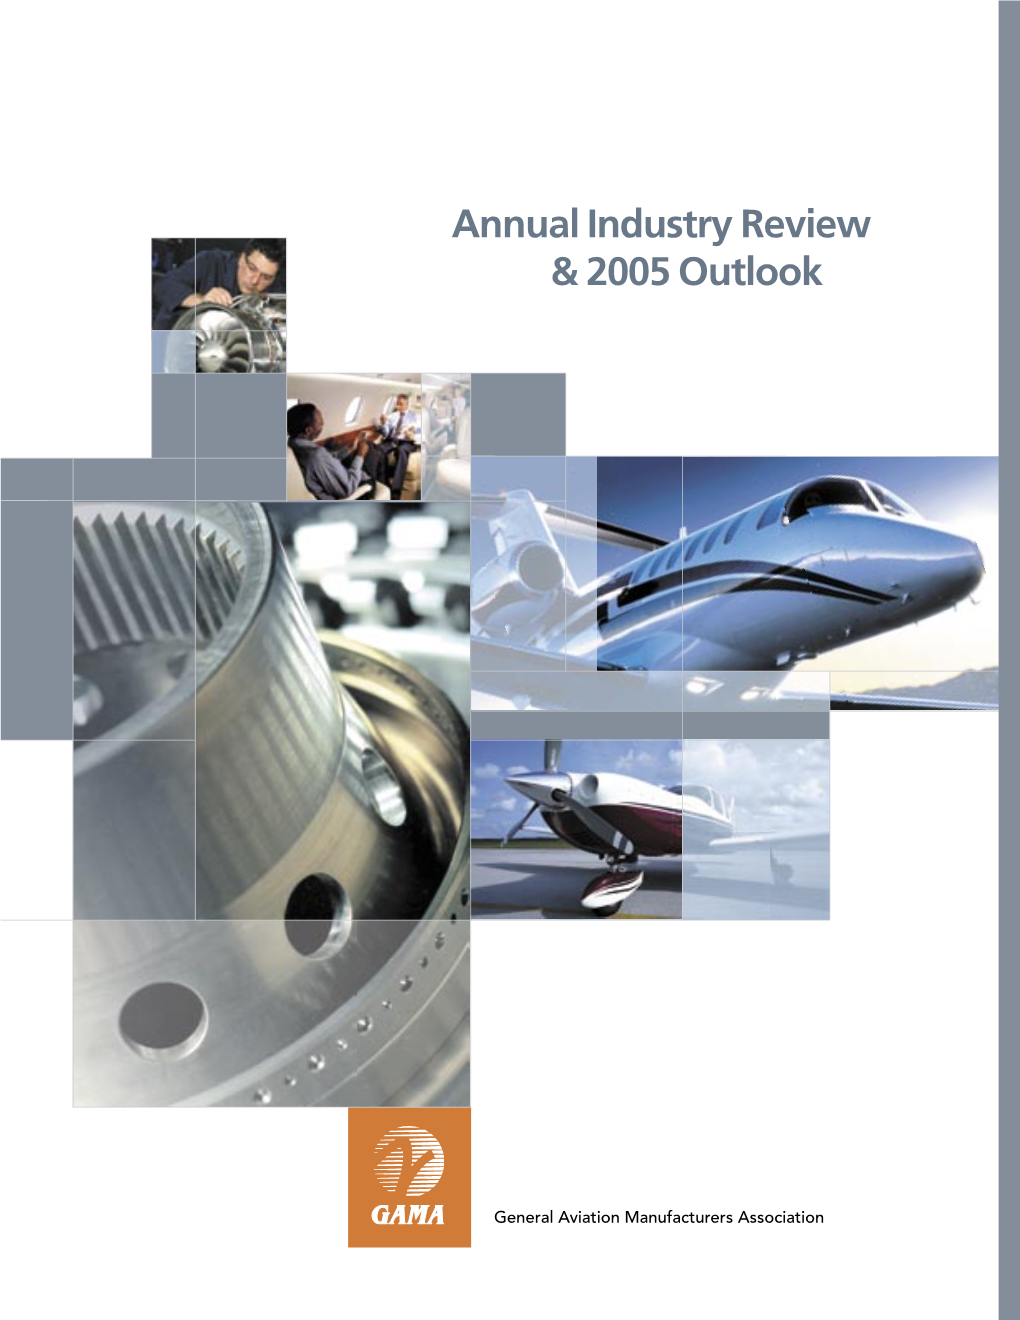 GAMA Annual Industry Review & 2005 Outlook